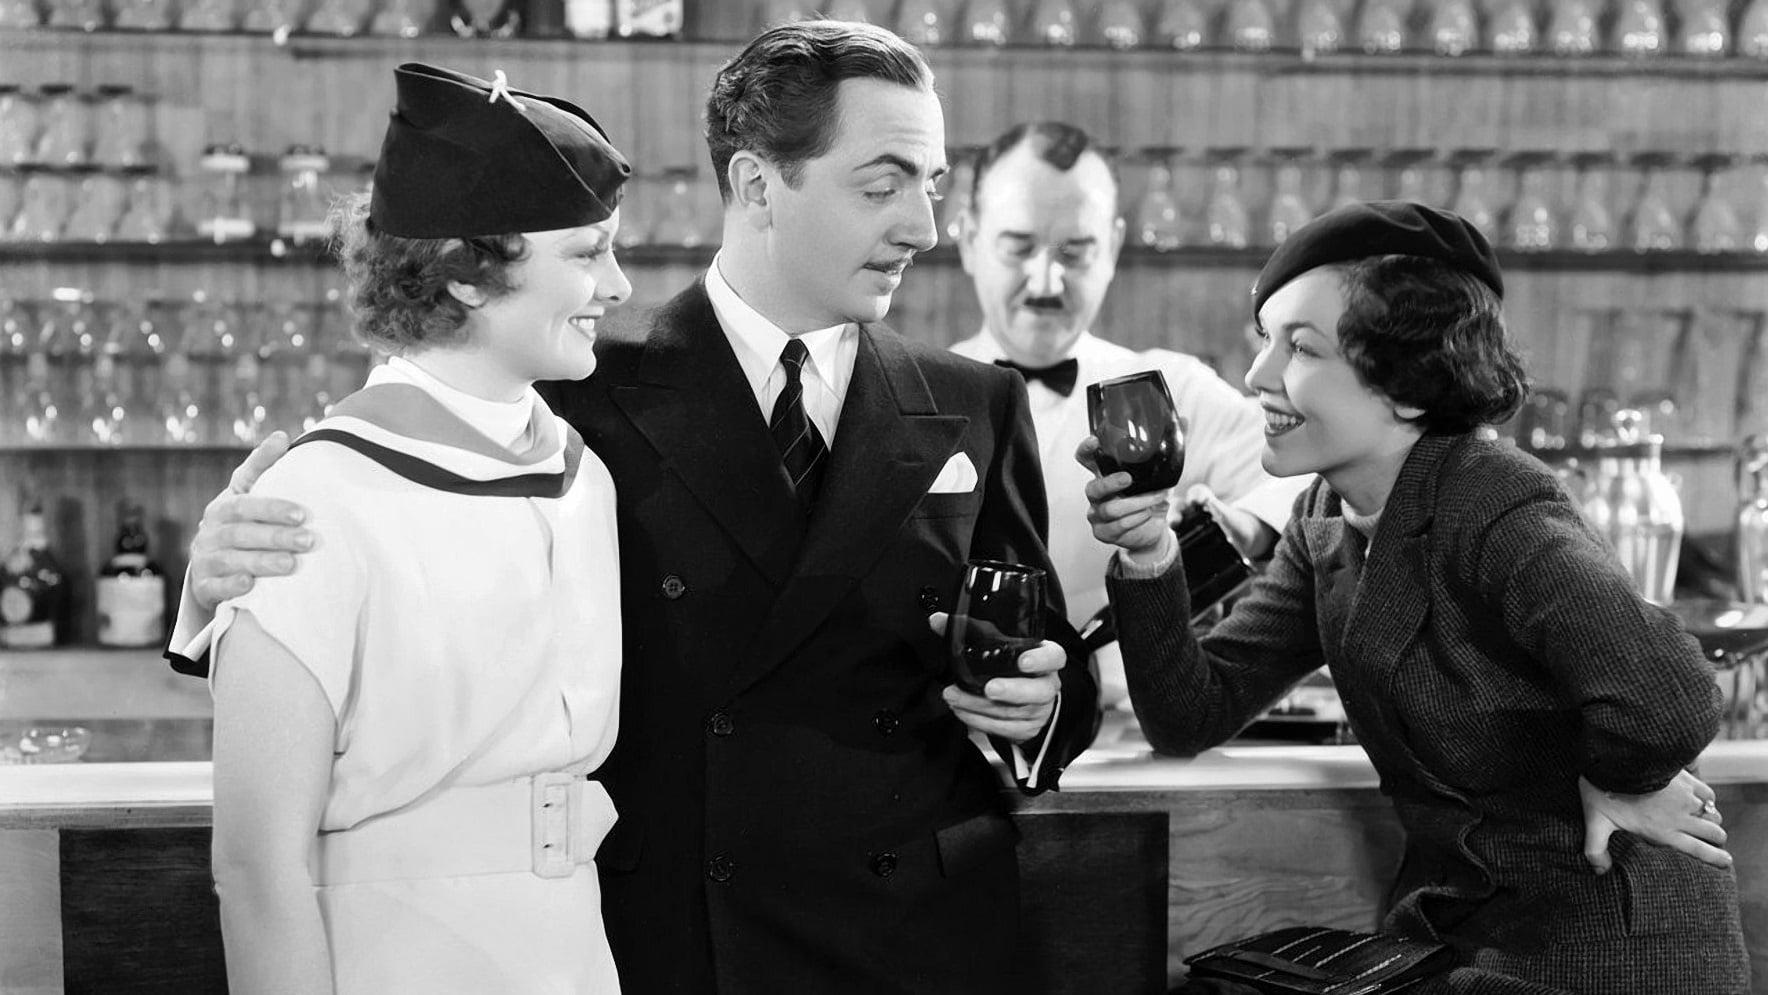 Backdrop Image for The Thin Man